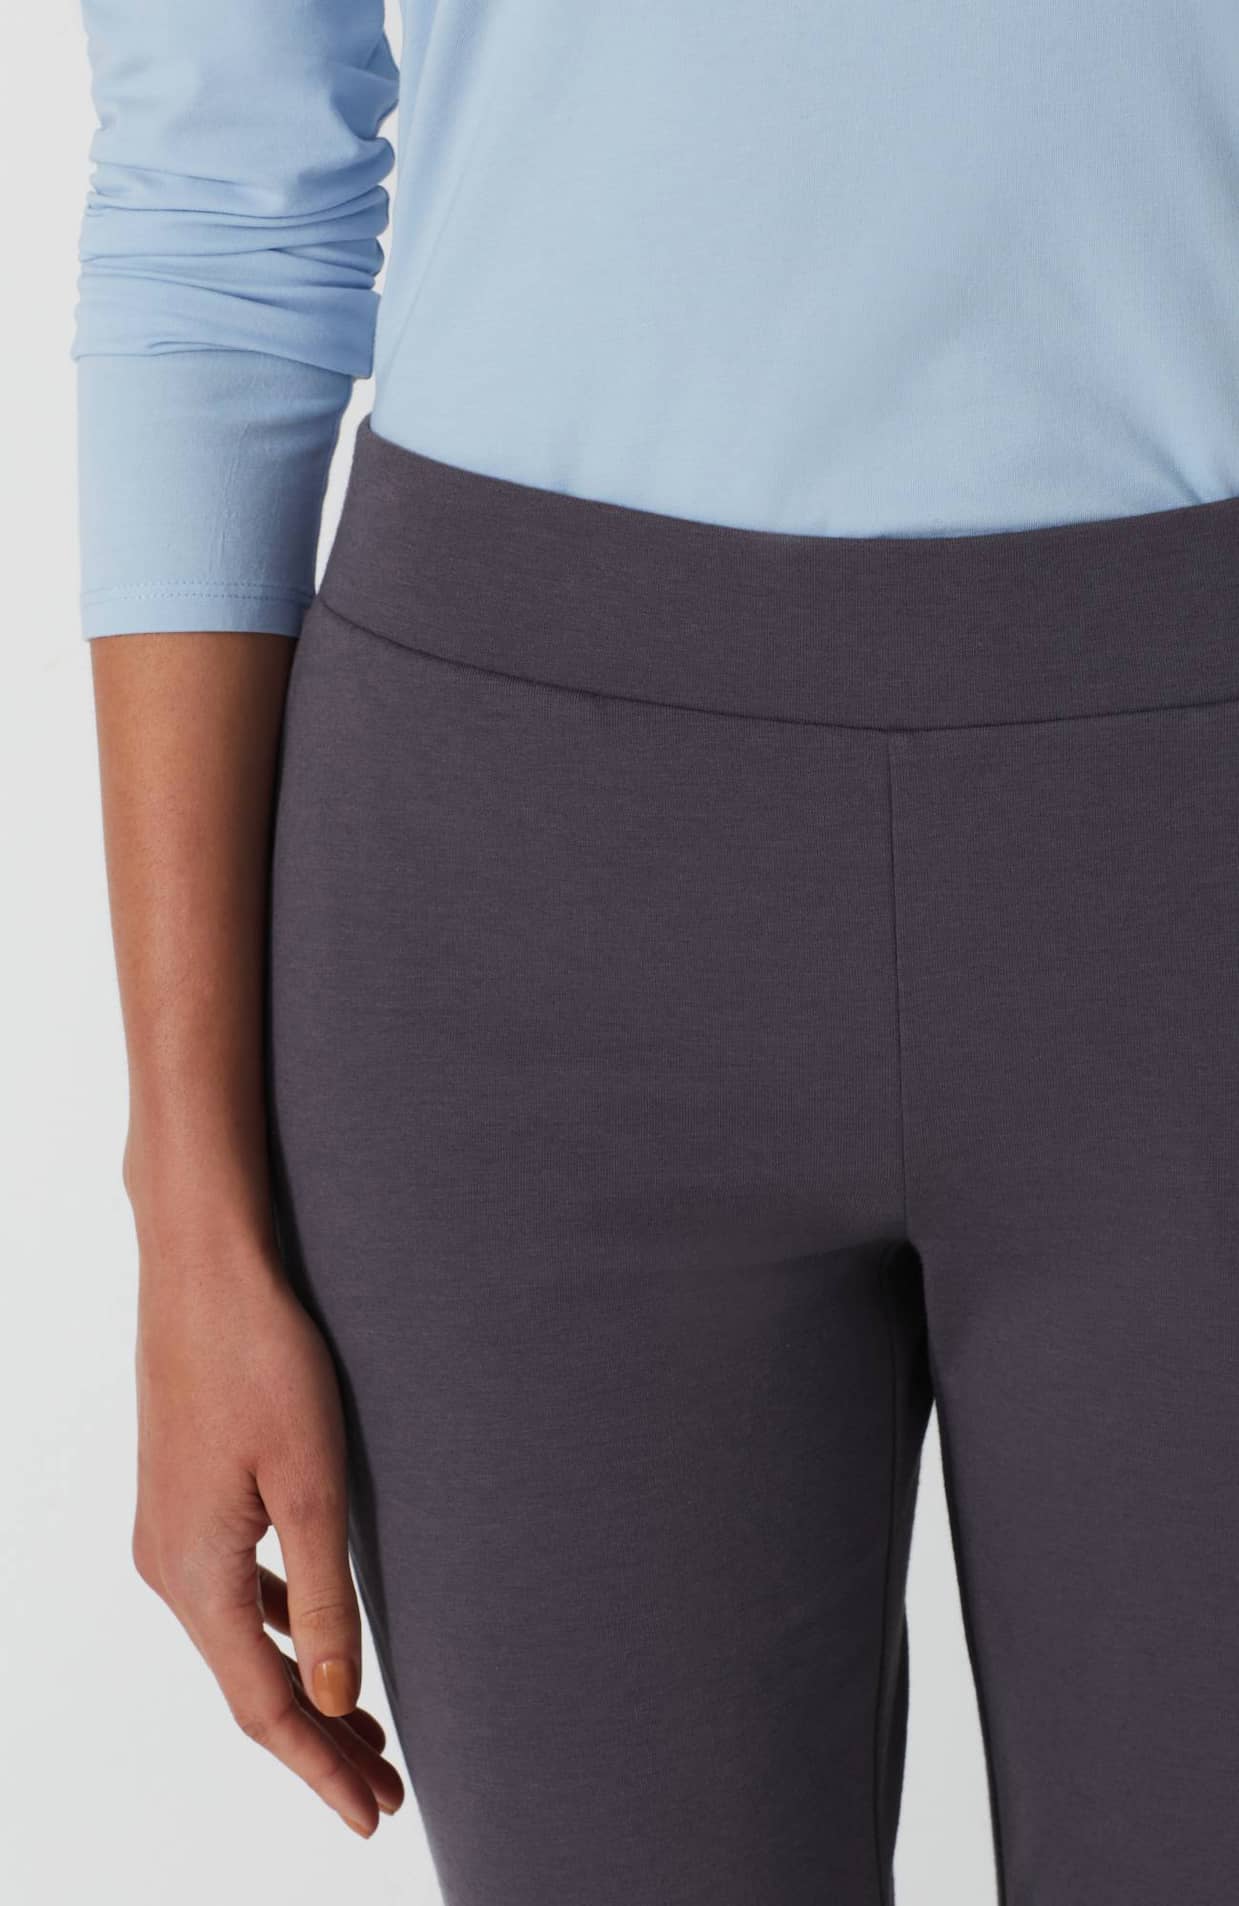 J.Jill - Introducing our precision-stretch pants